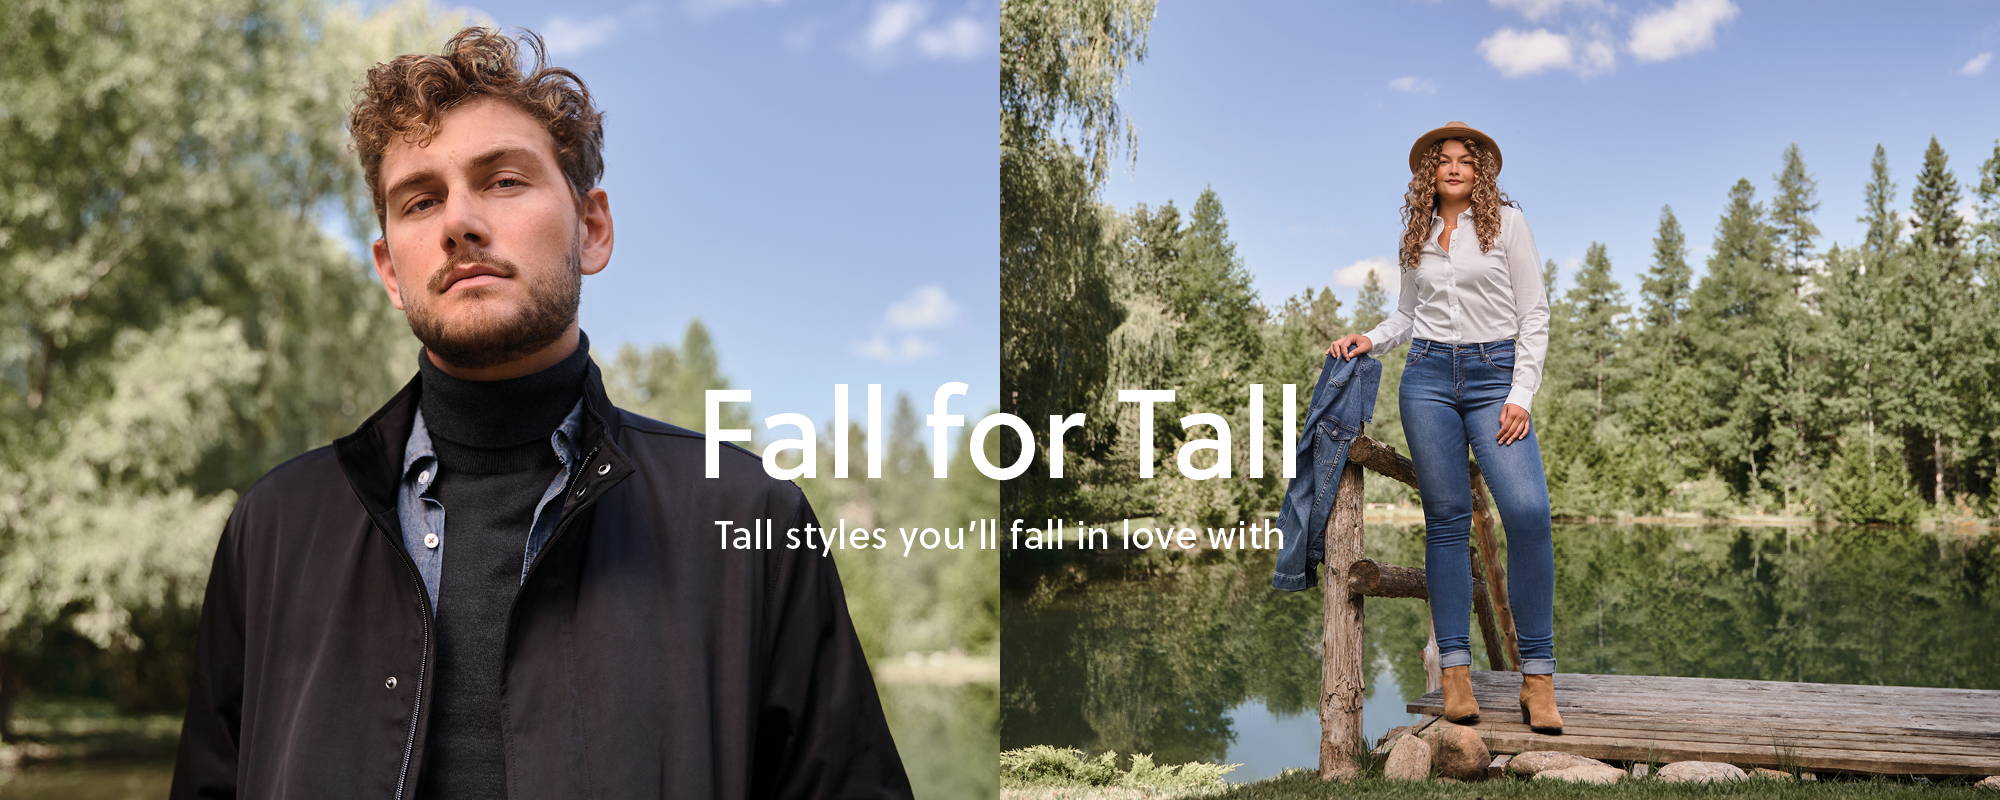 Fall for Tall. Tall styles you'll fall in love with by joyouslyvibrantlife.